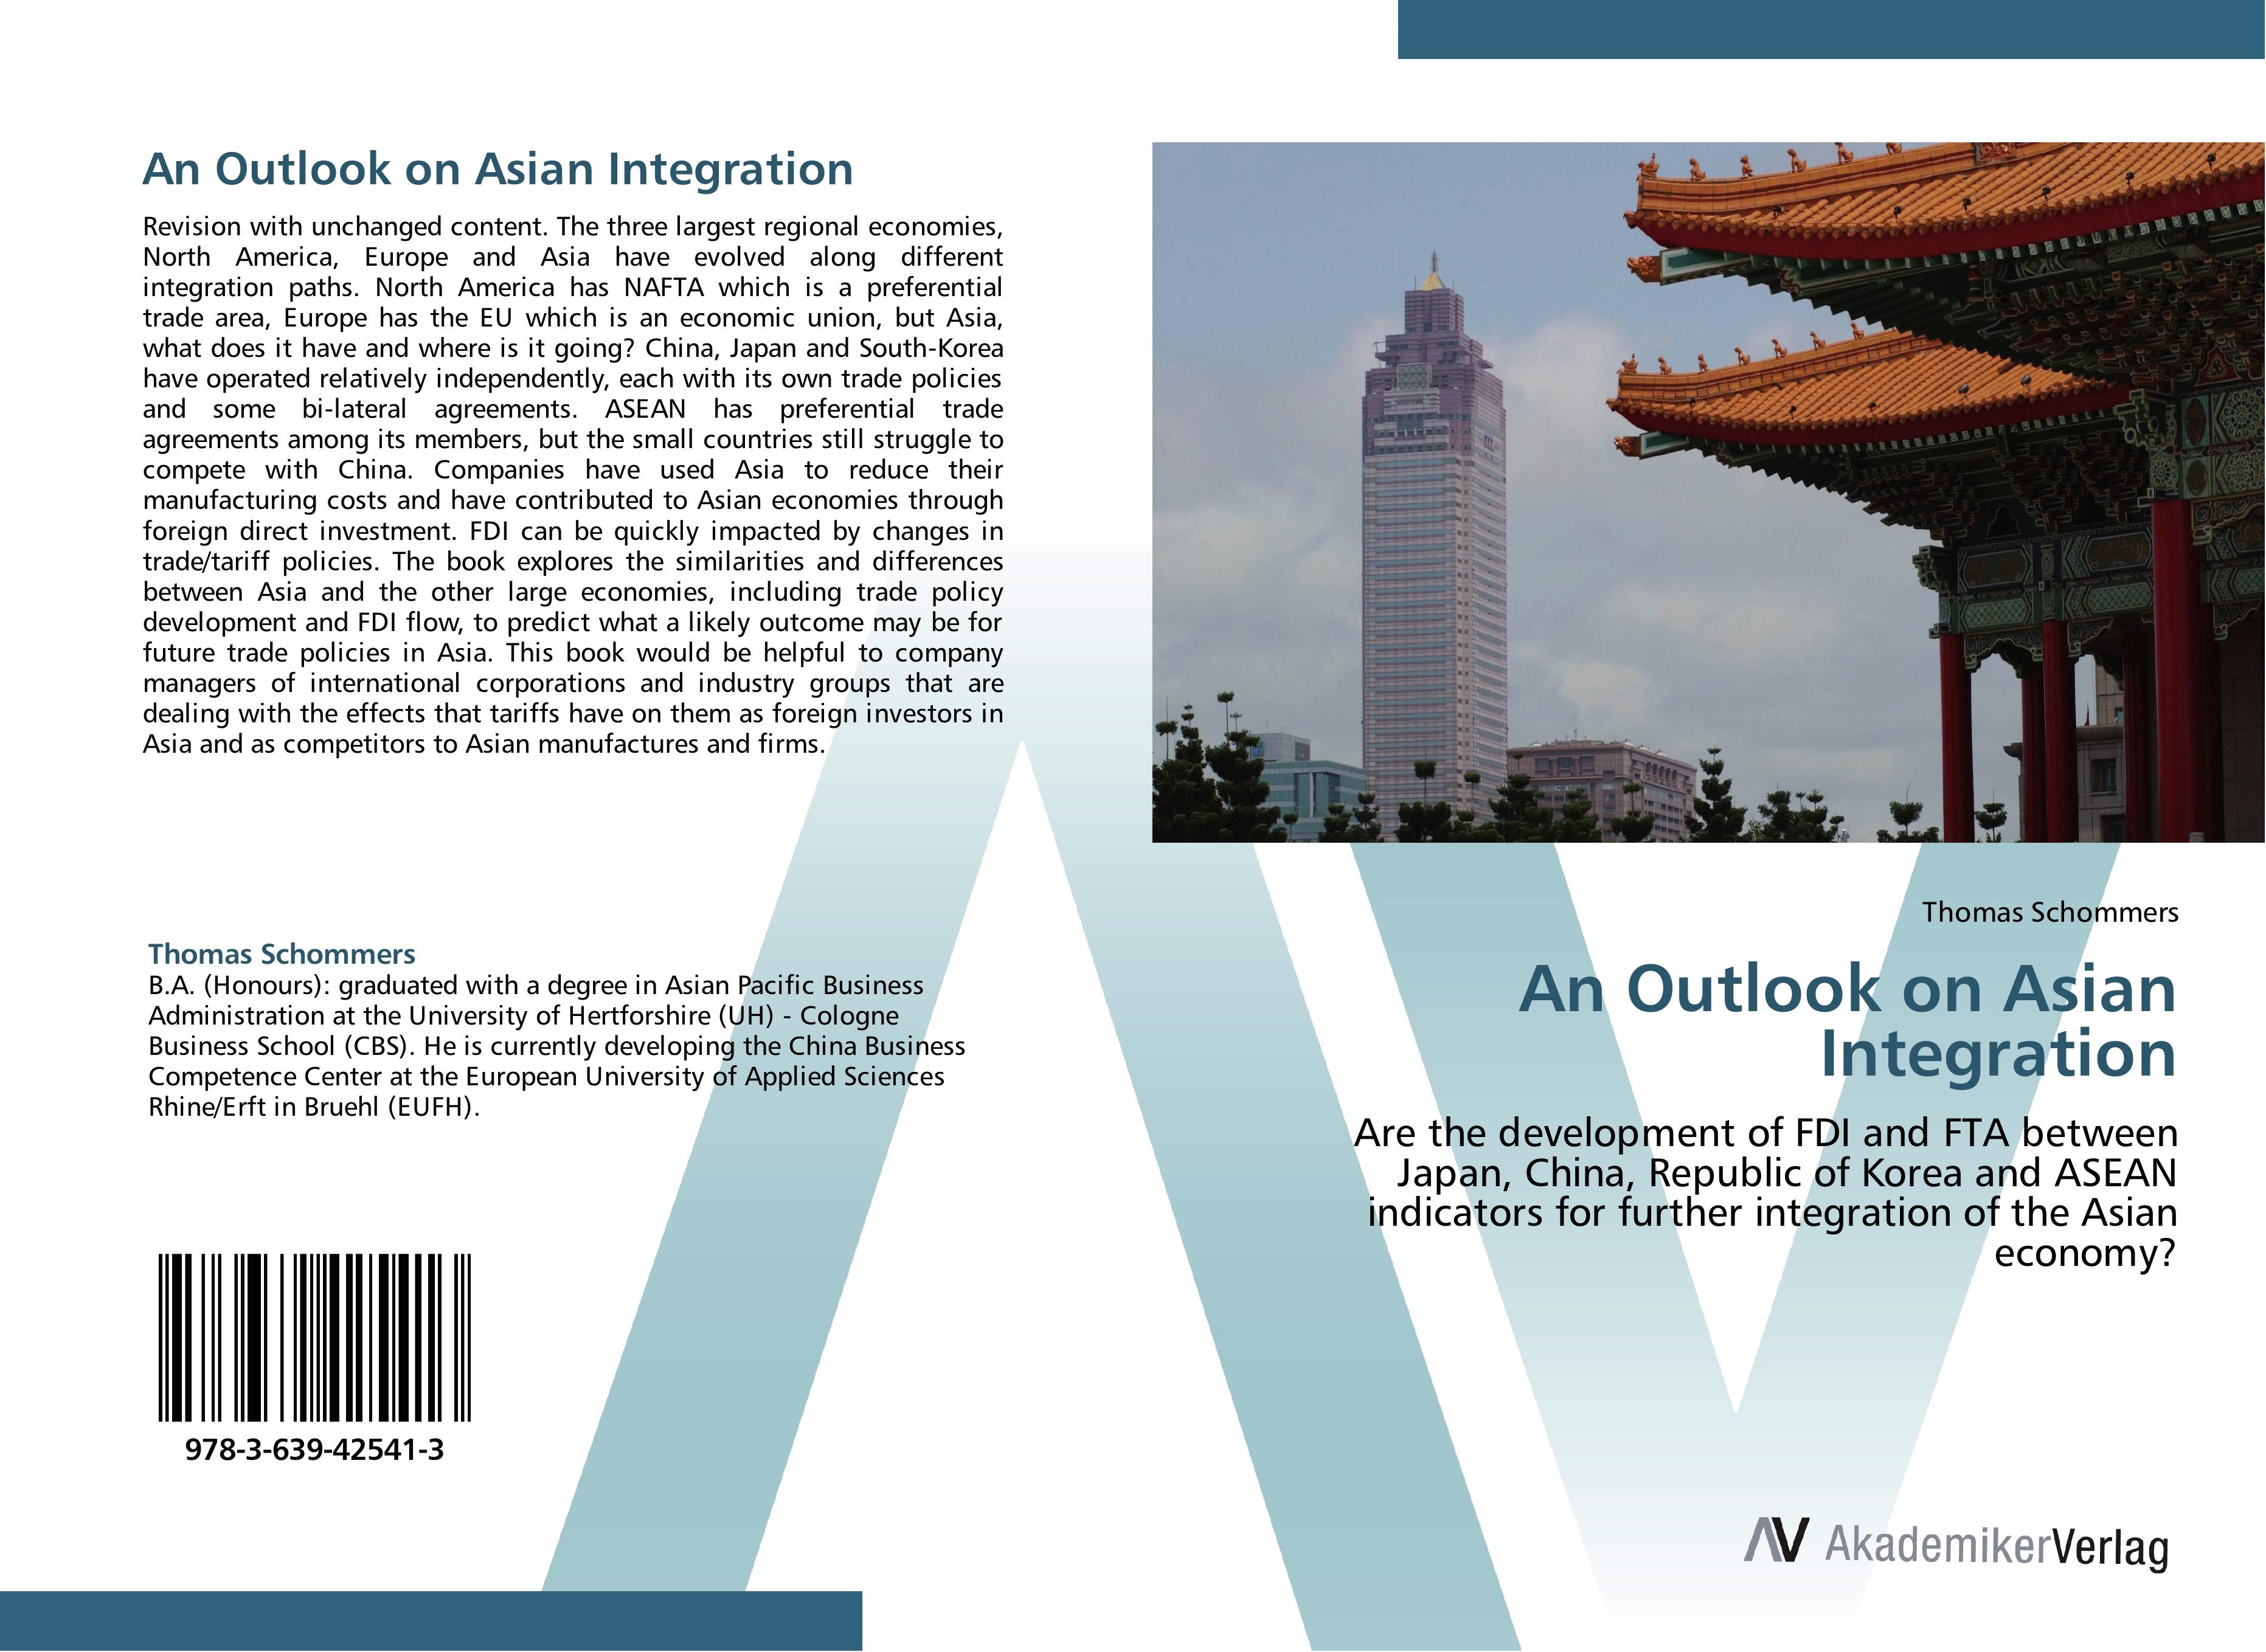 An Outlook on Asian Integration - Thomas Schommers